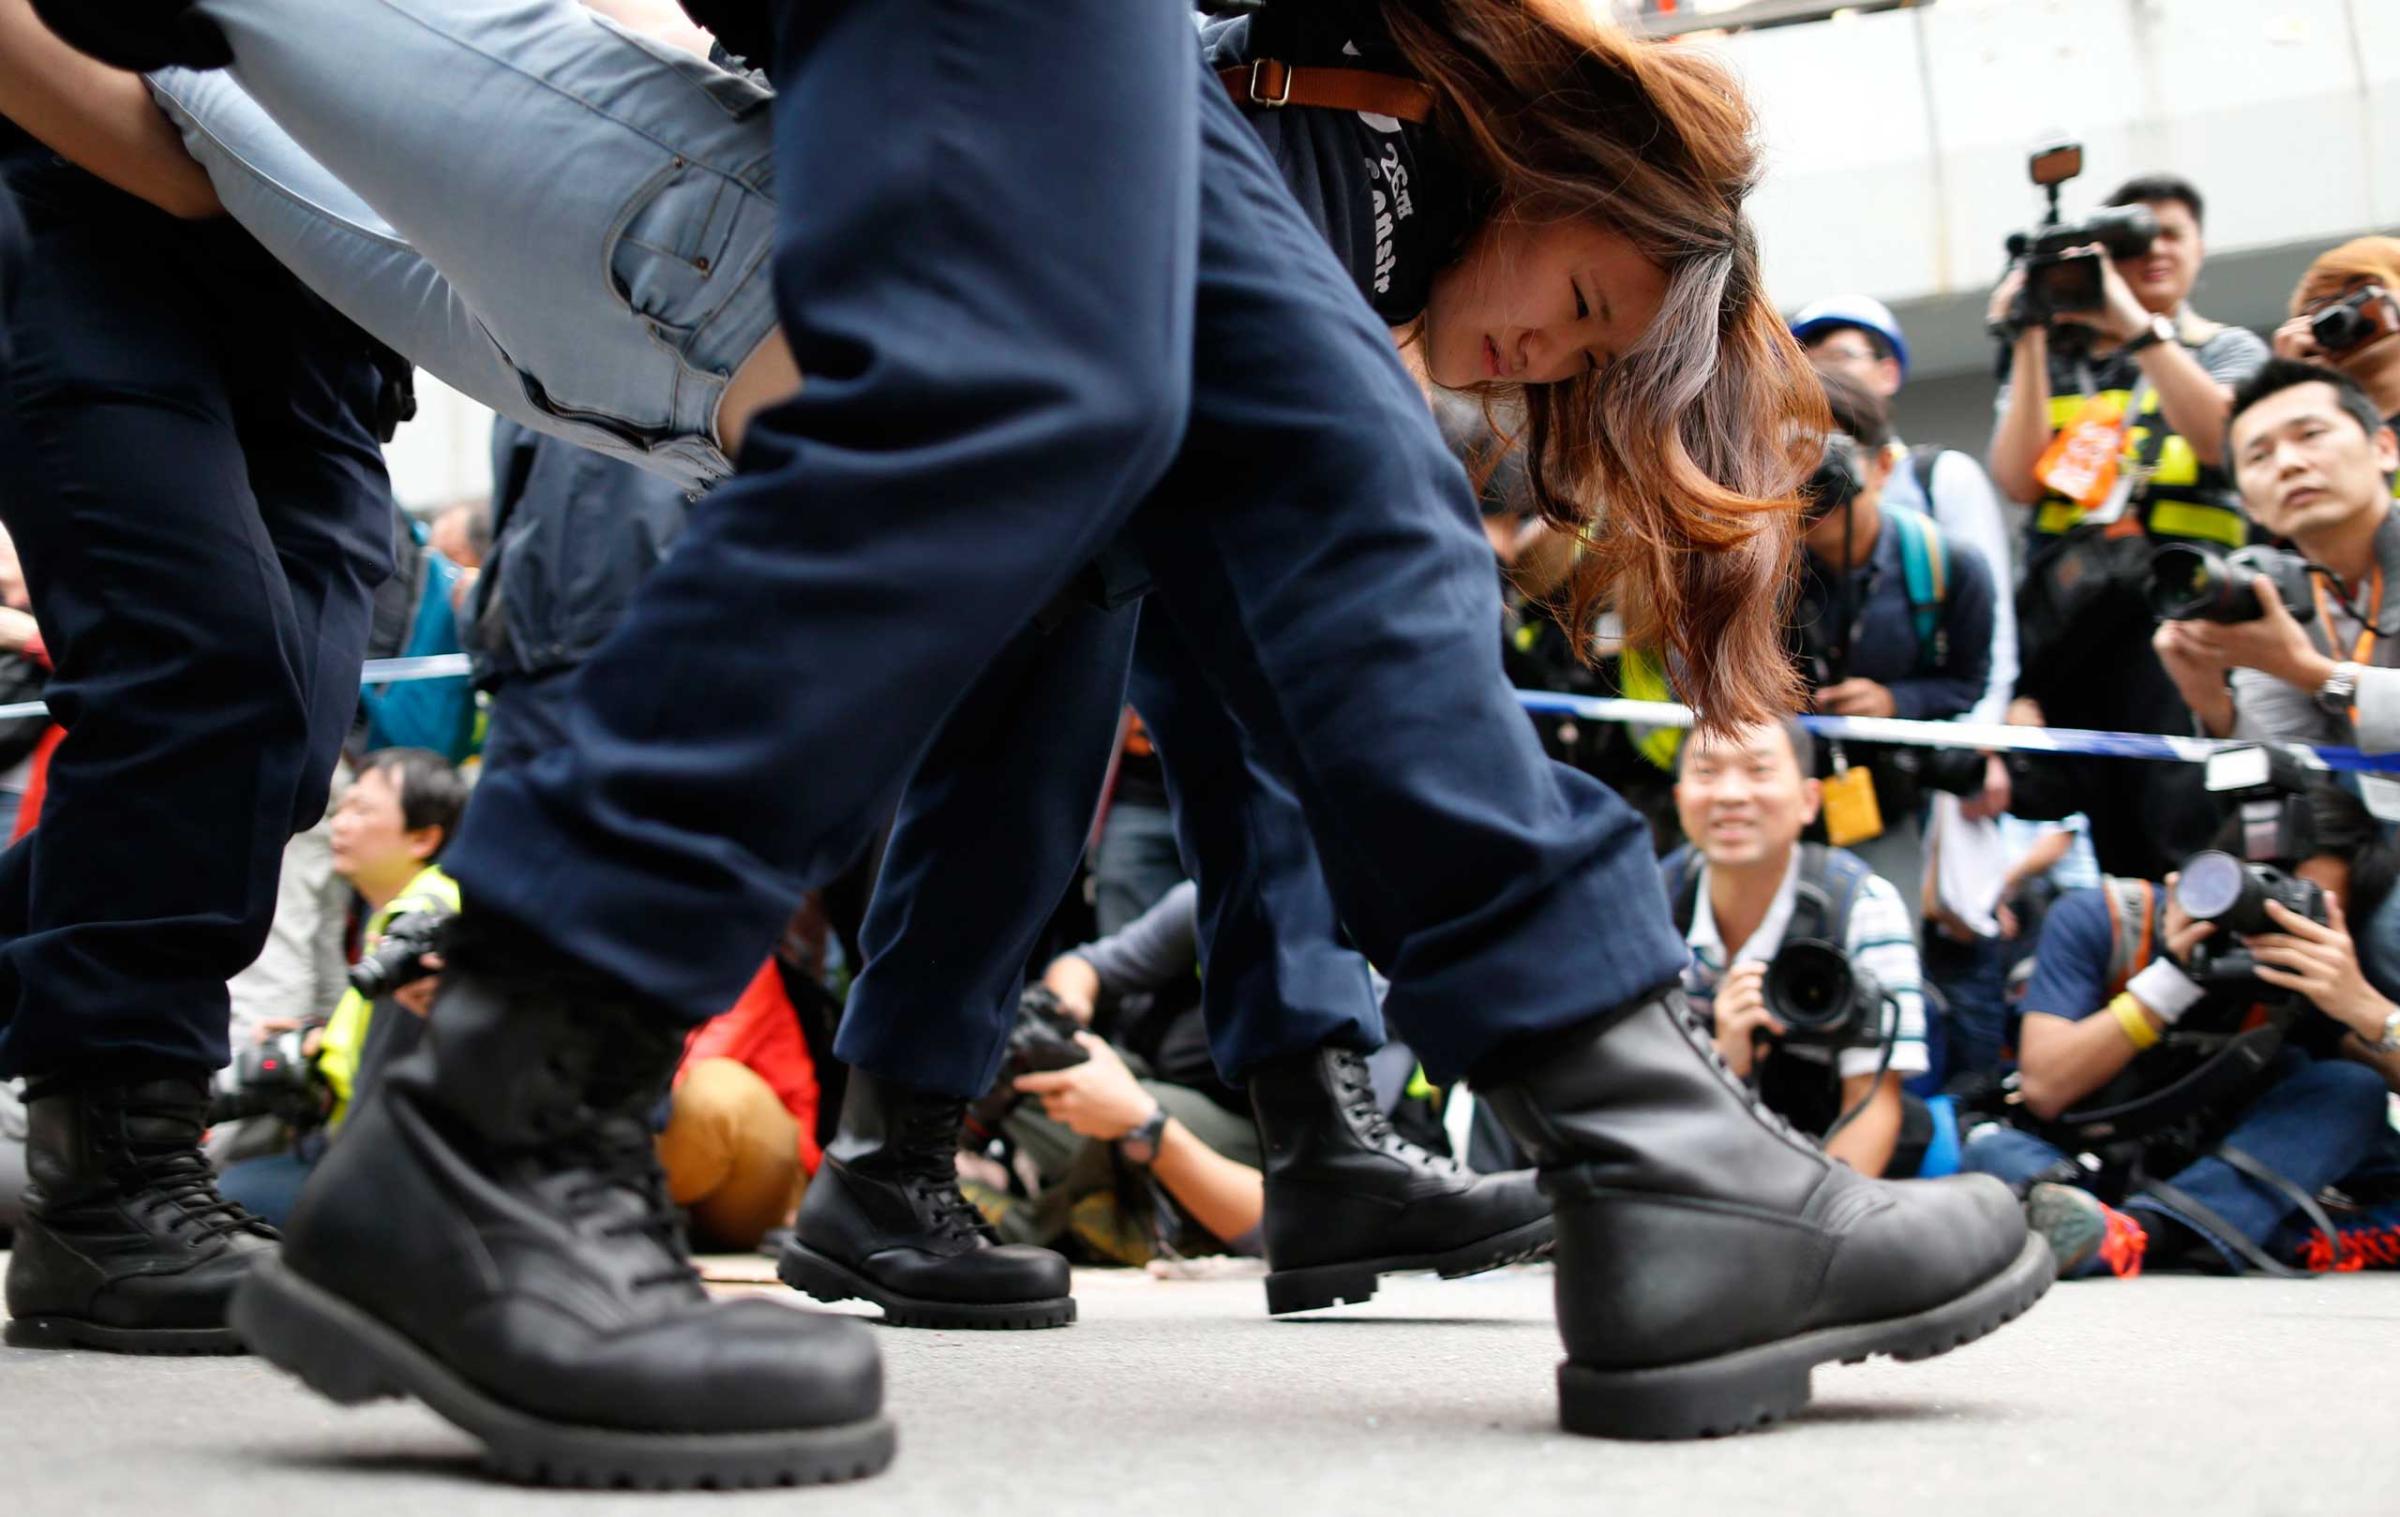 A demonstrator is taken away by police from an area previously blocked by pro-democracy supporters, outside the government headquarters in Hong Kong